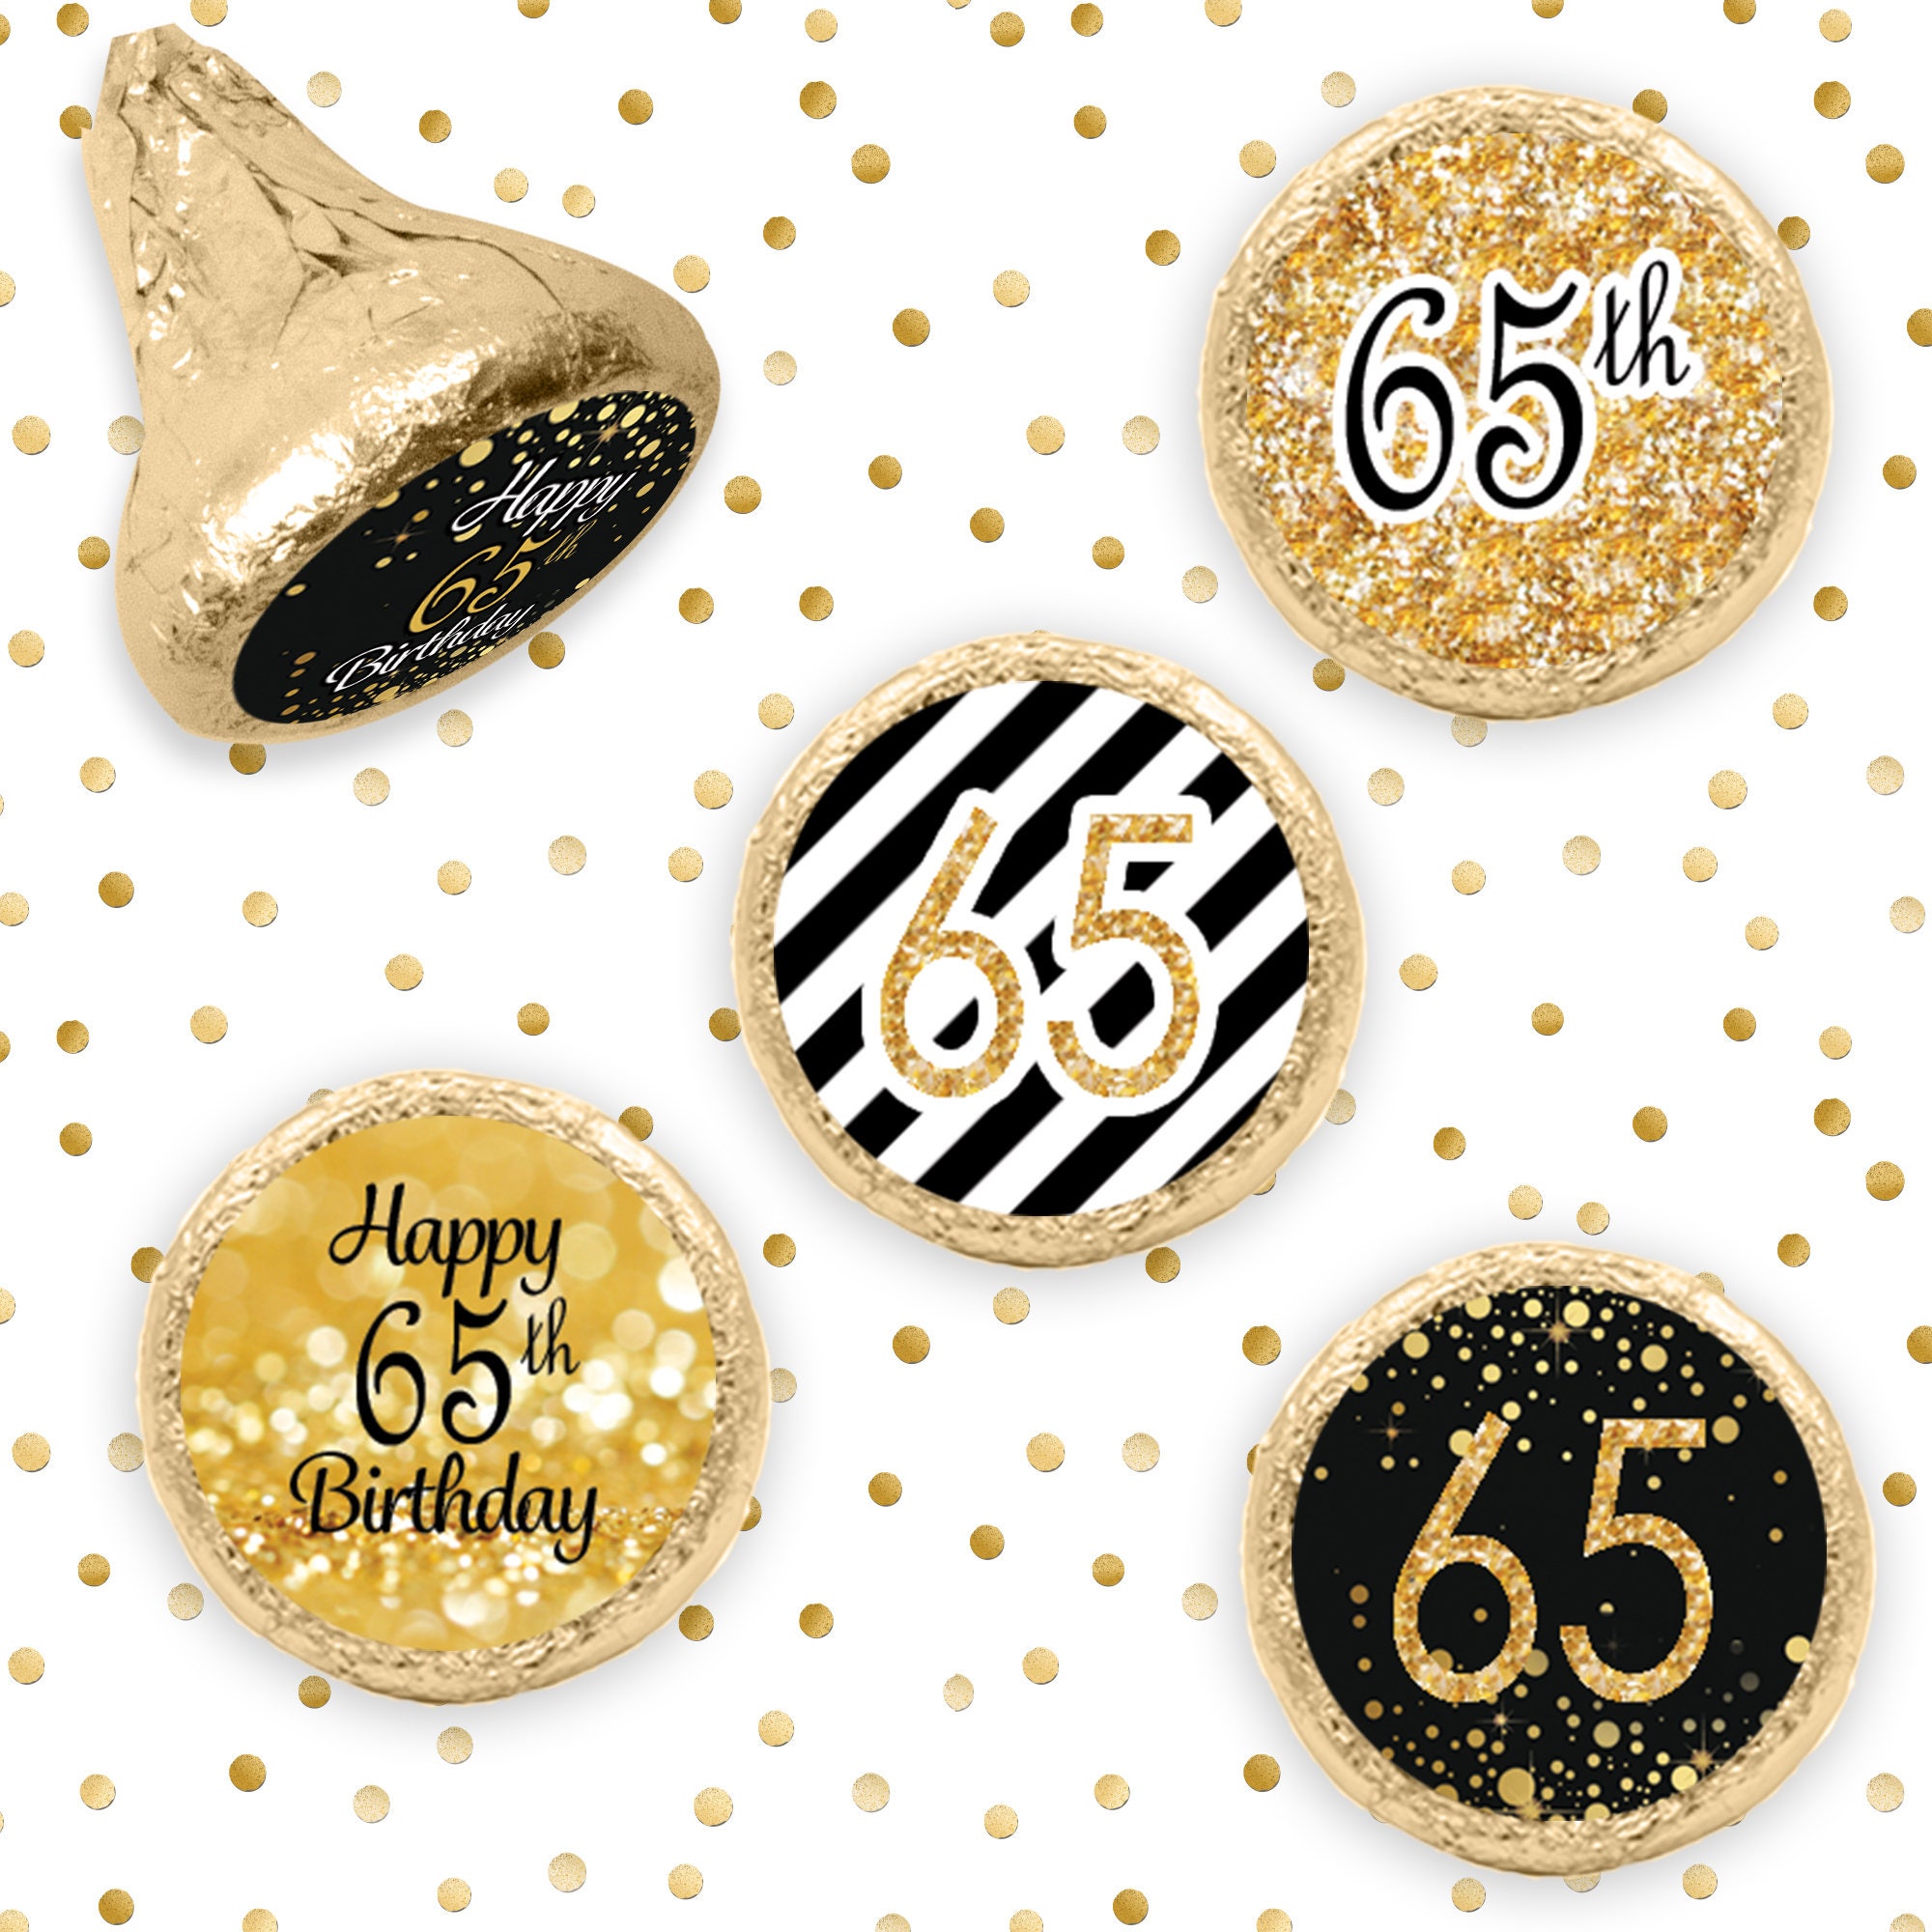 65th Birthday Party Decorations Gold And Black Stickers For